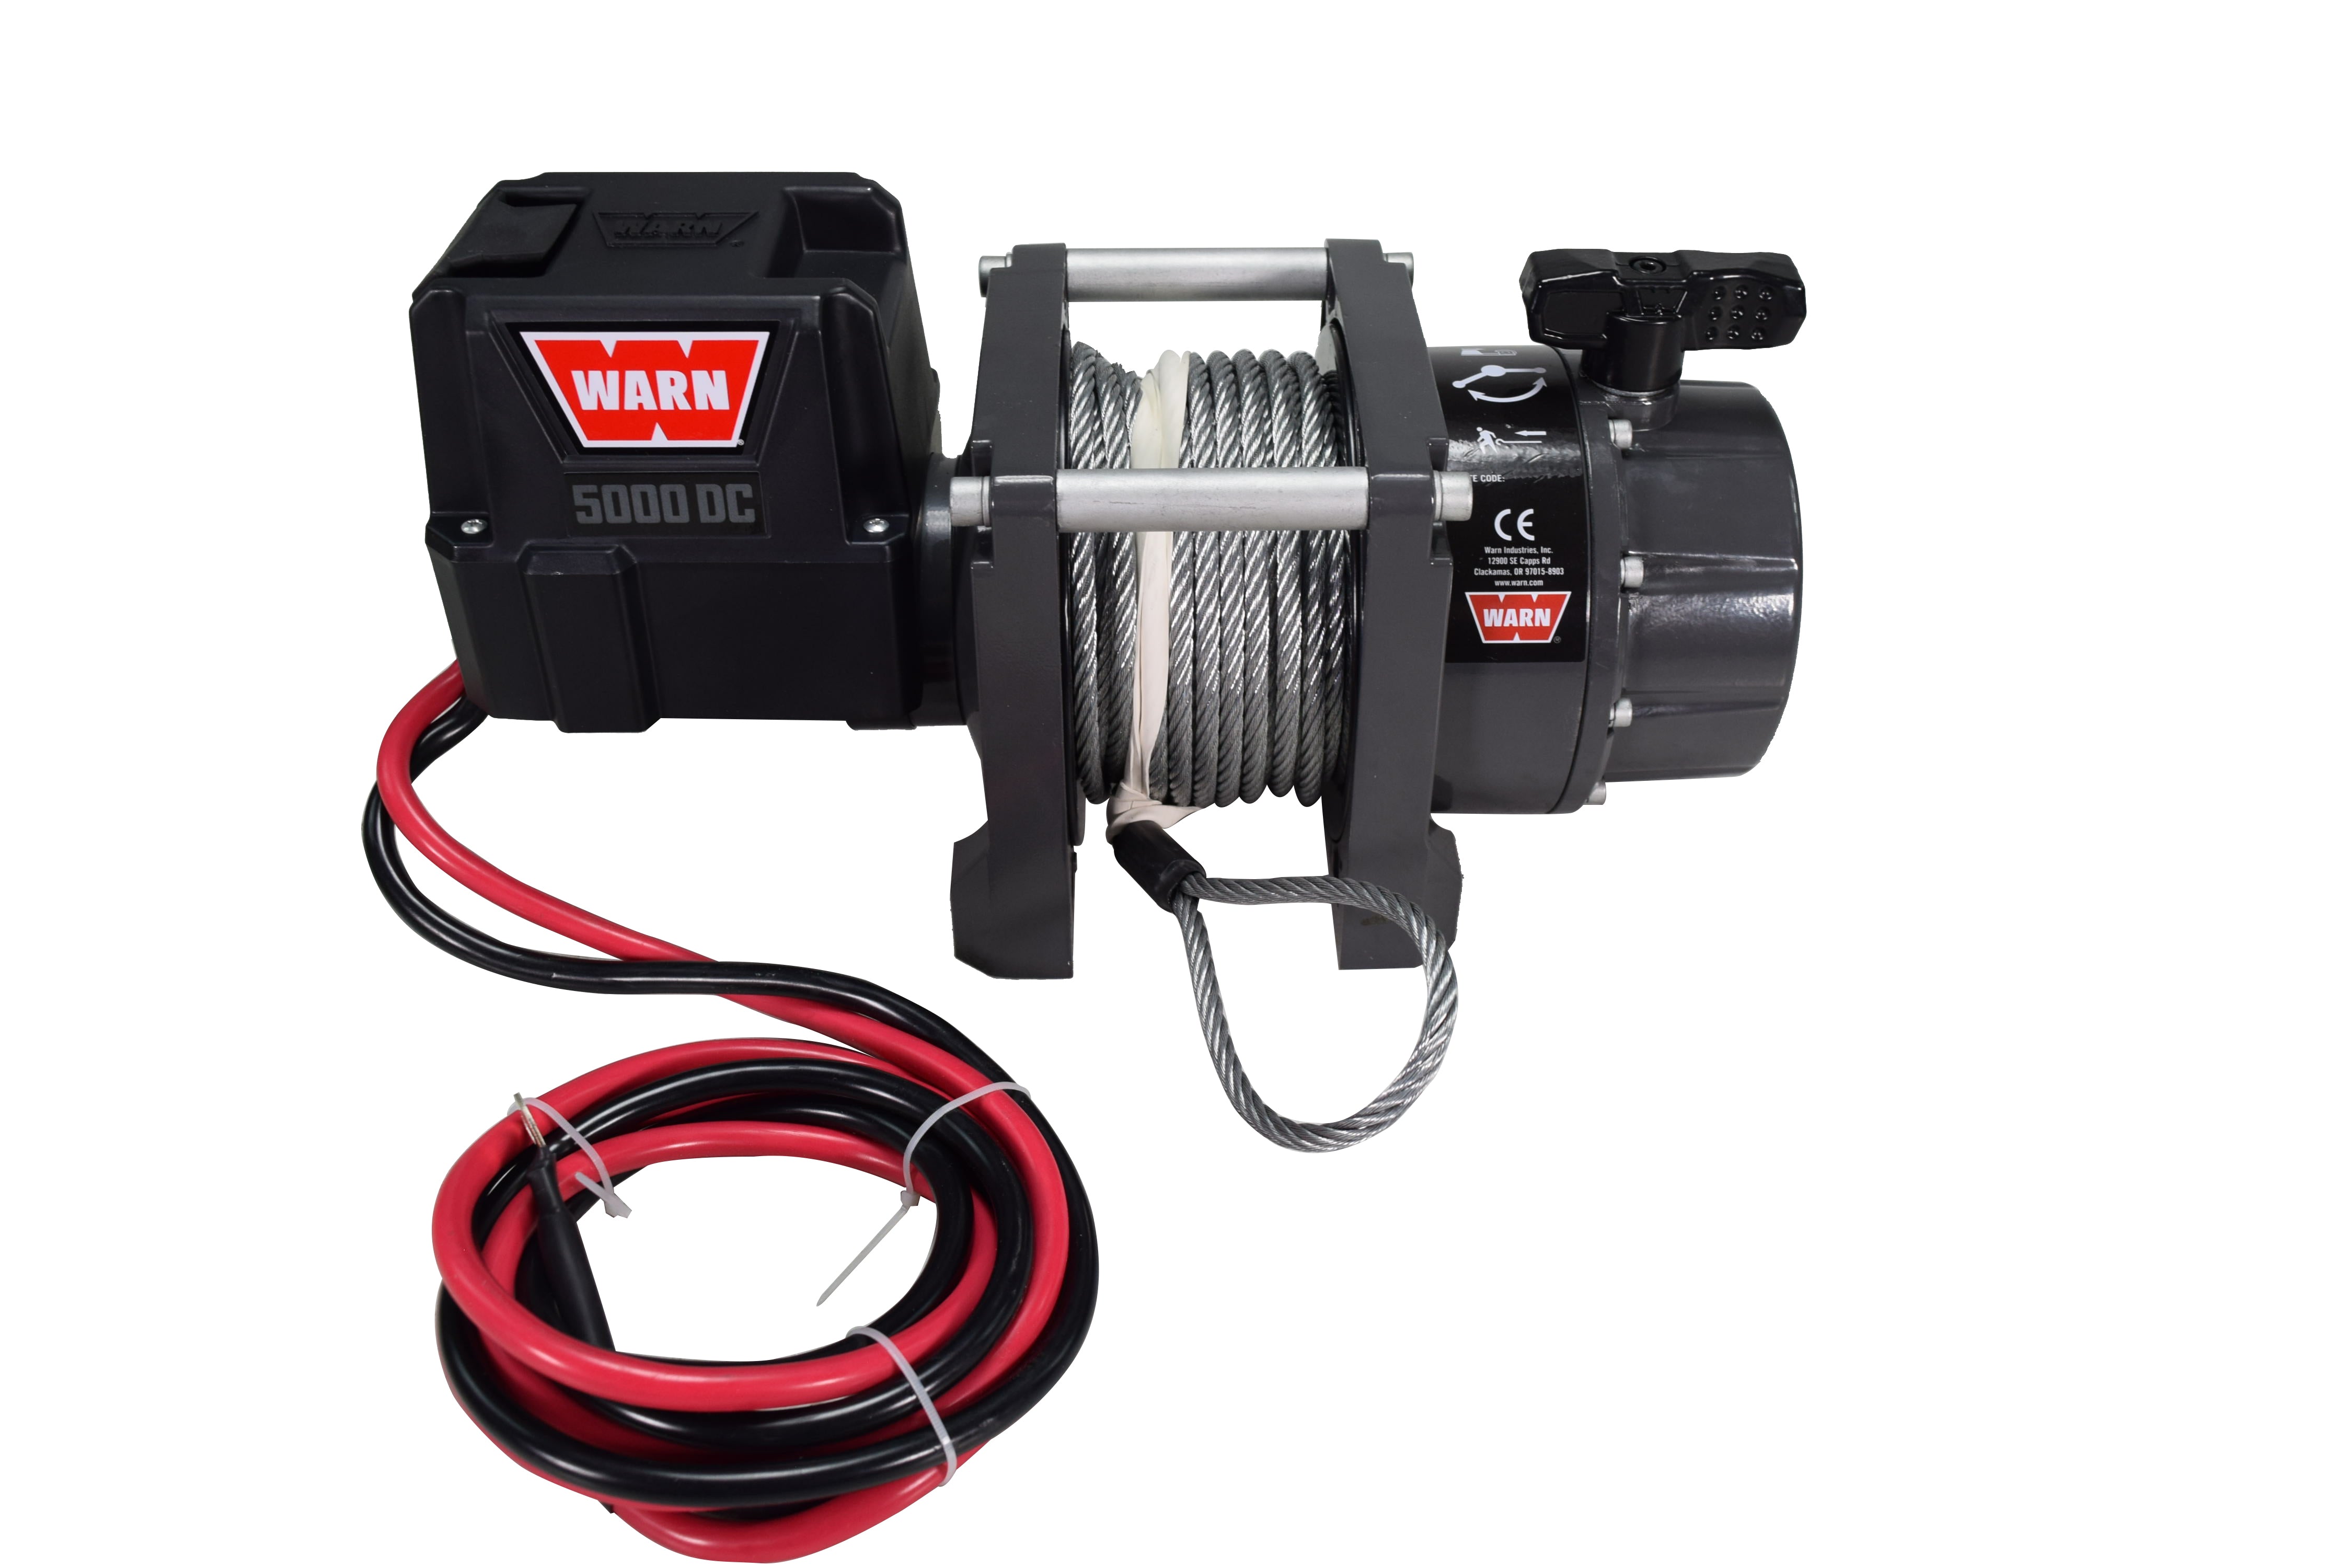 WARN-99963-5000-DC-Series-12V-Electric-Utility-Winch-CE-image-5